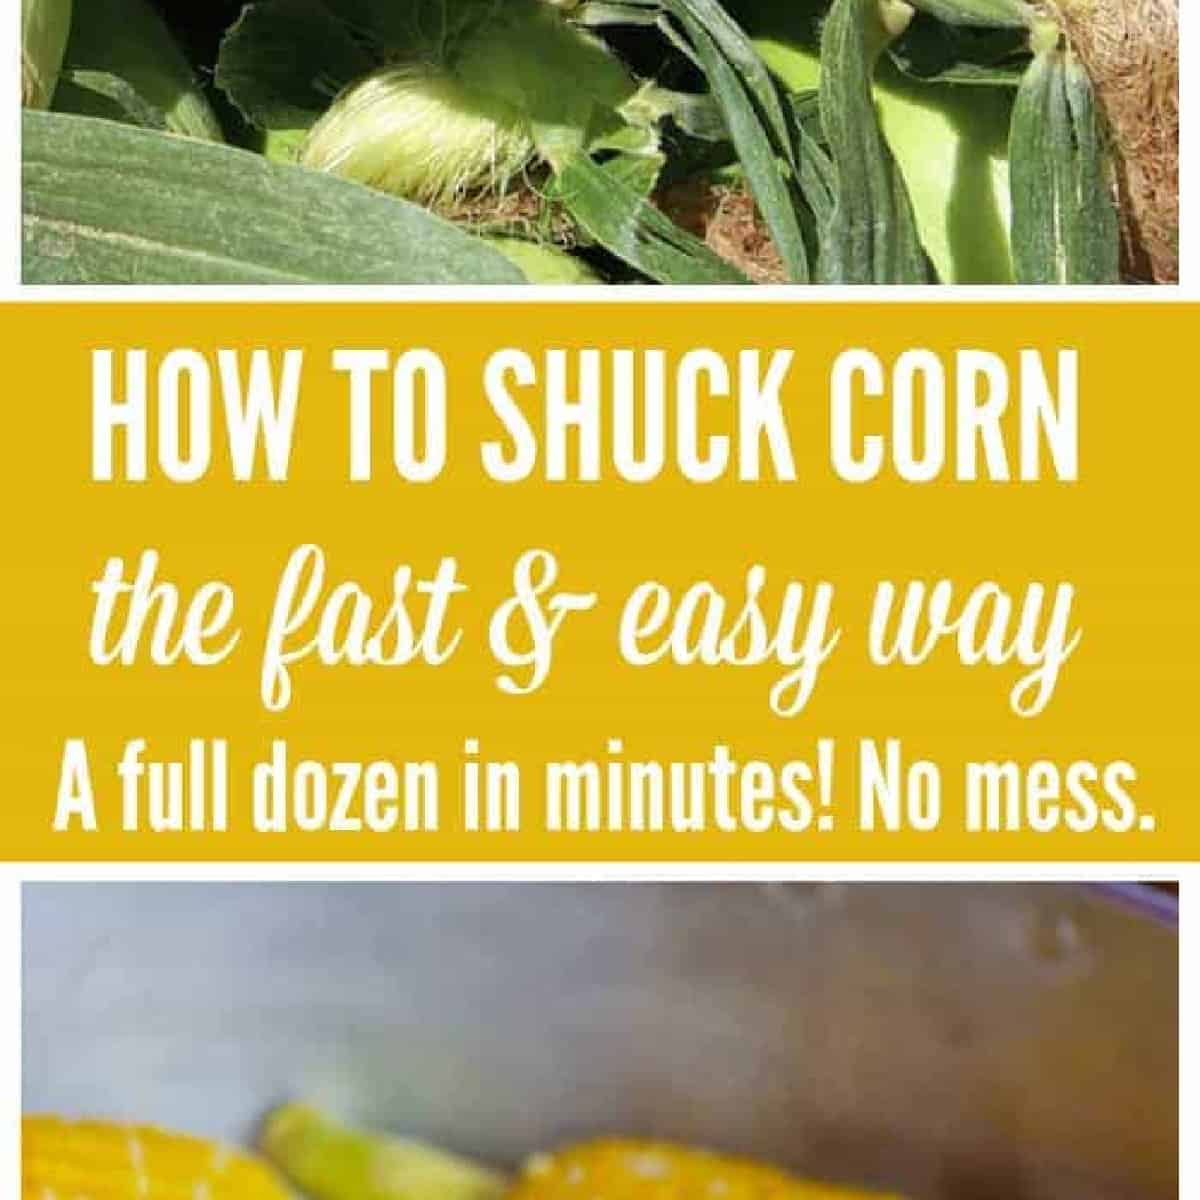 How To Shuck Corn The Fast & Easy Way!